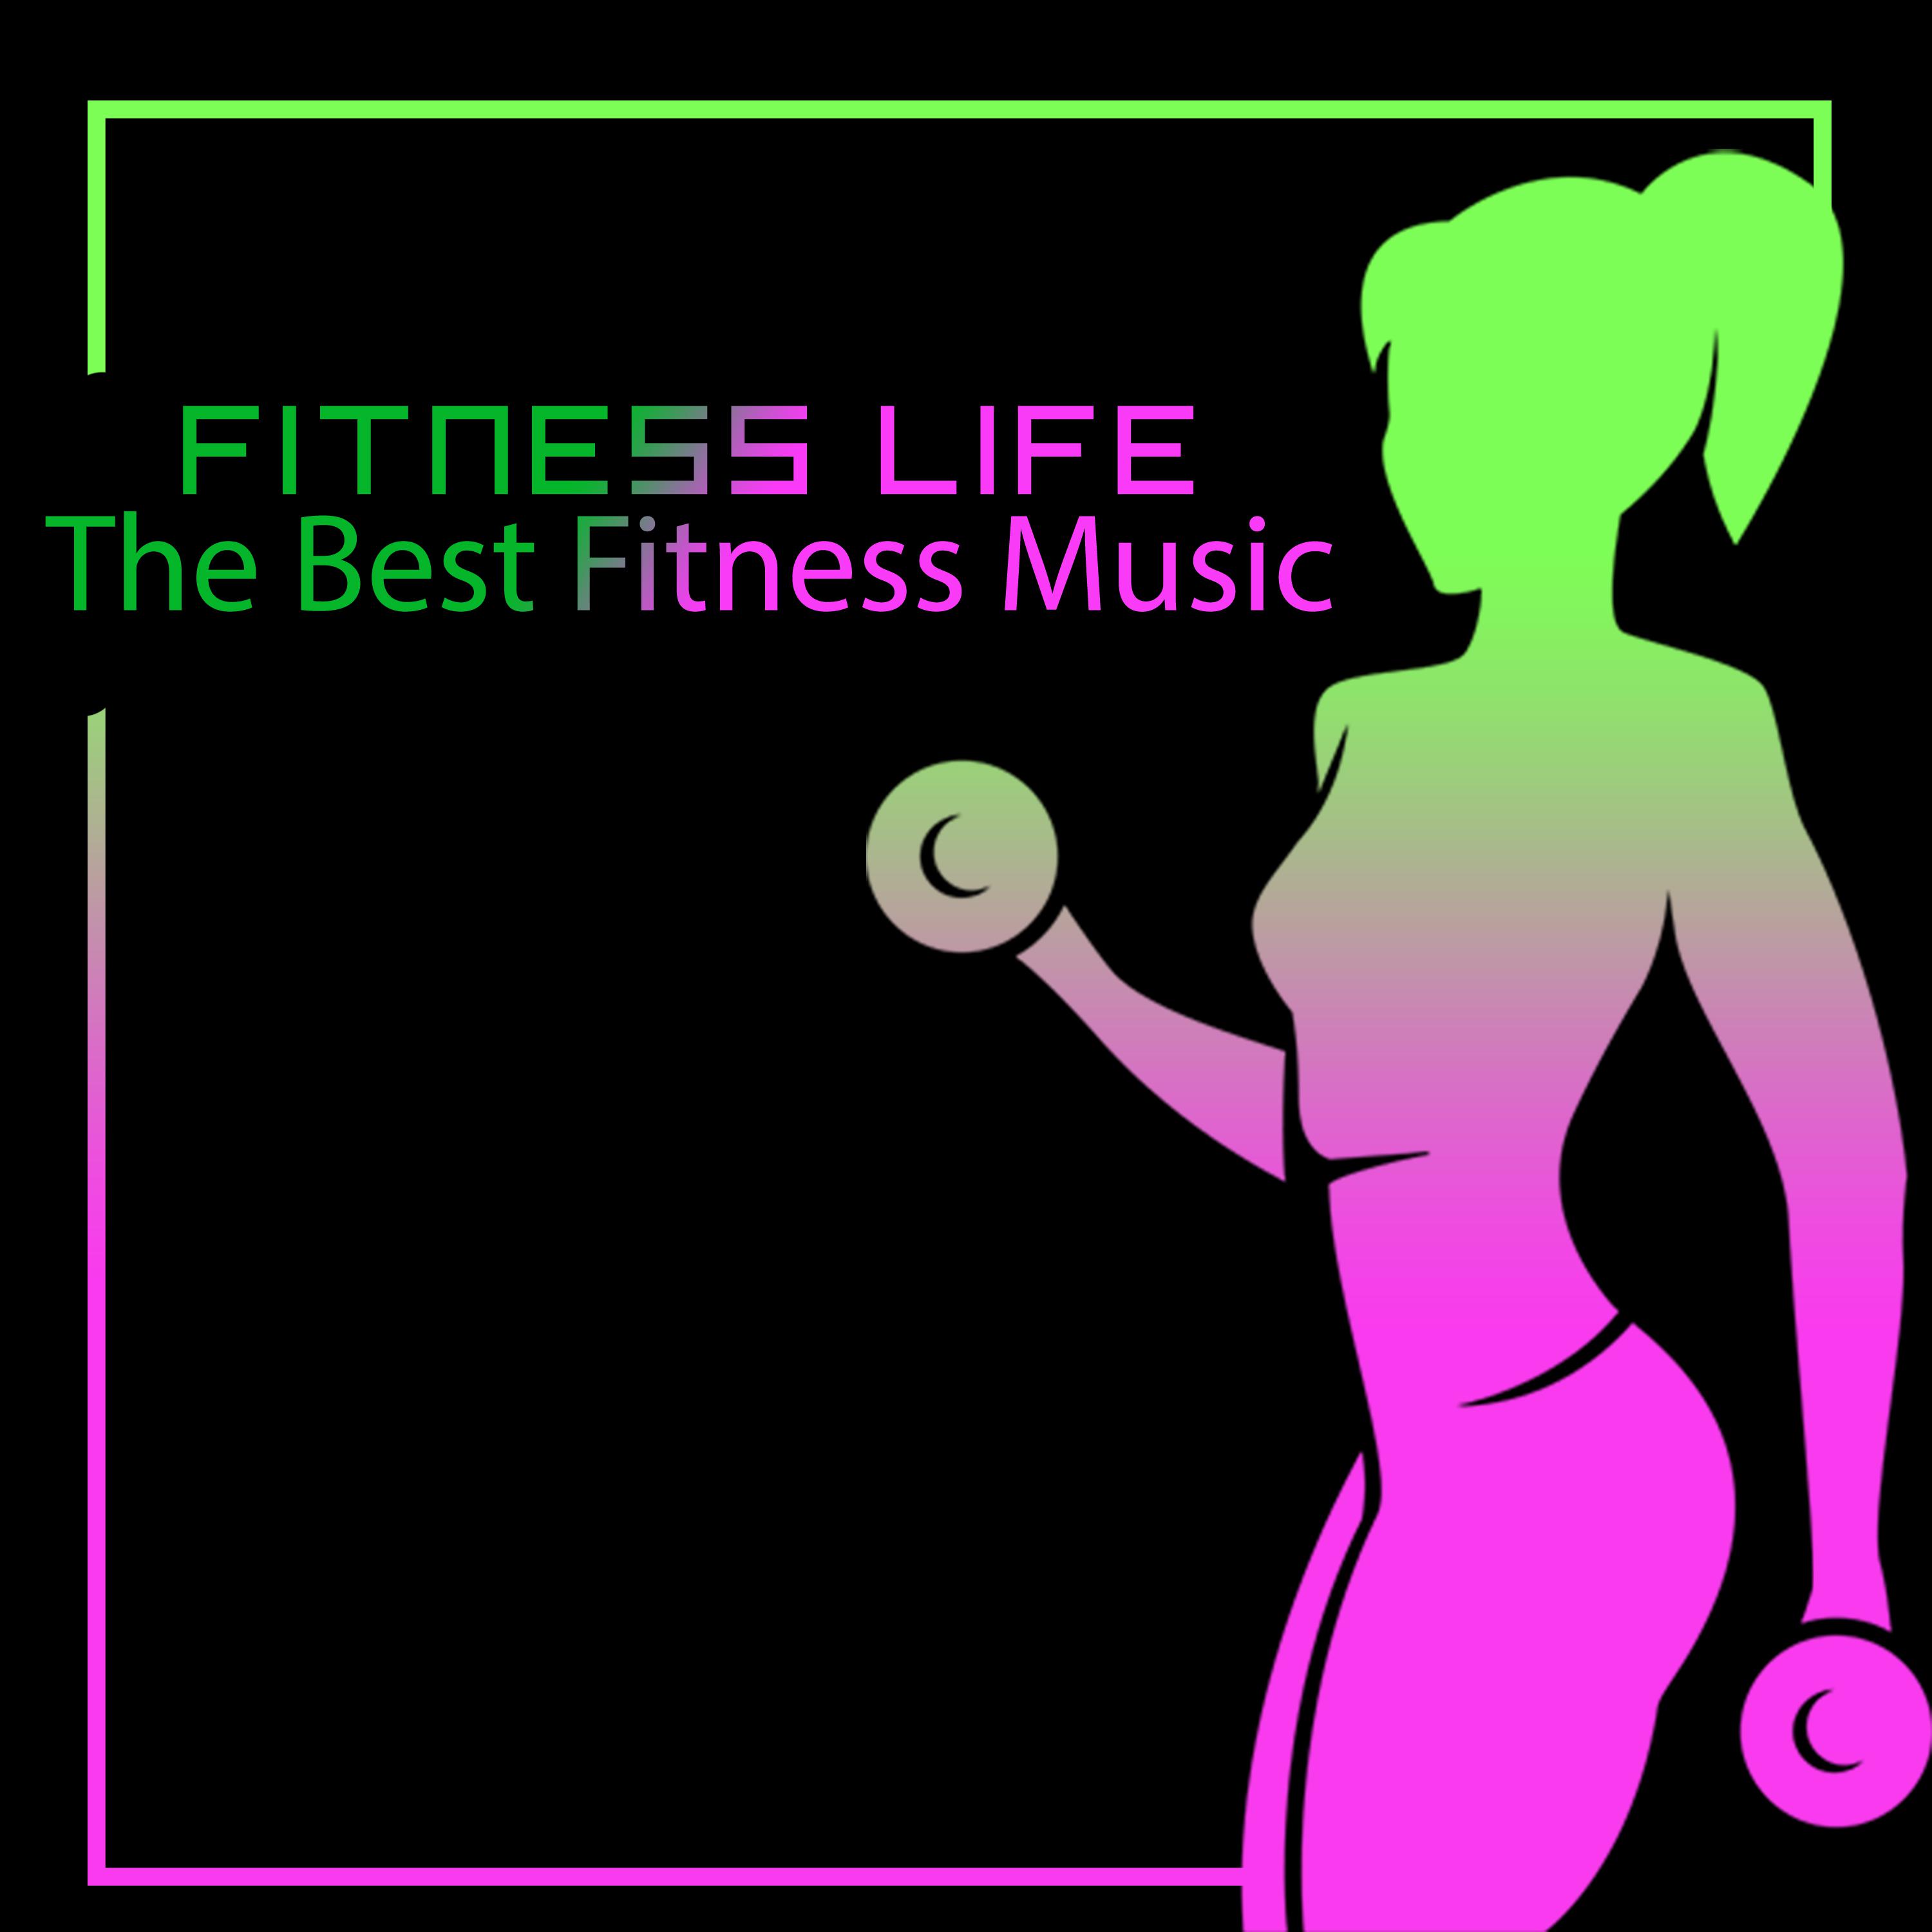 The Best Fitness Music